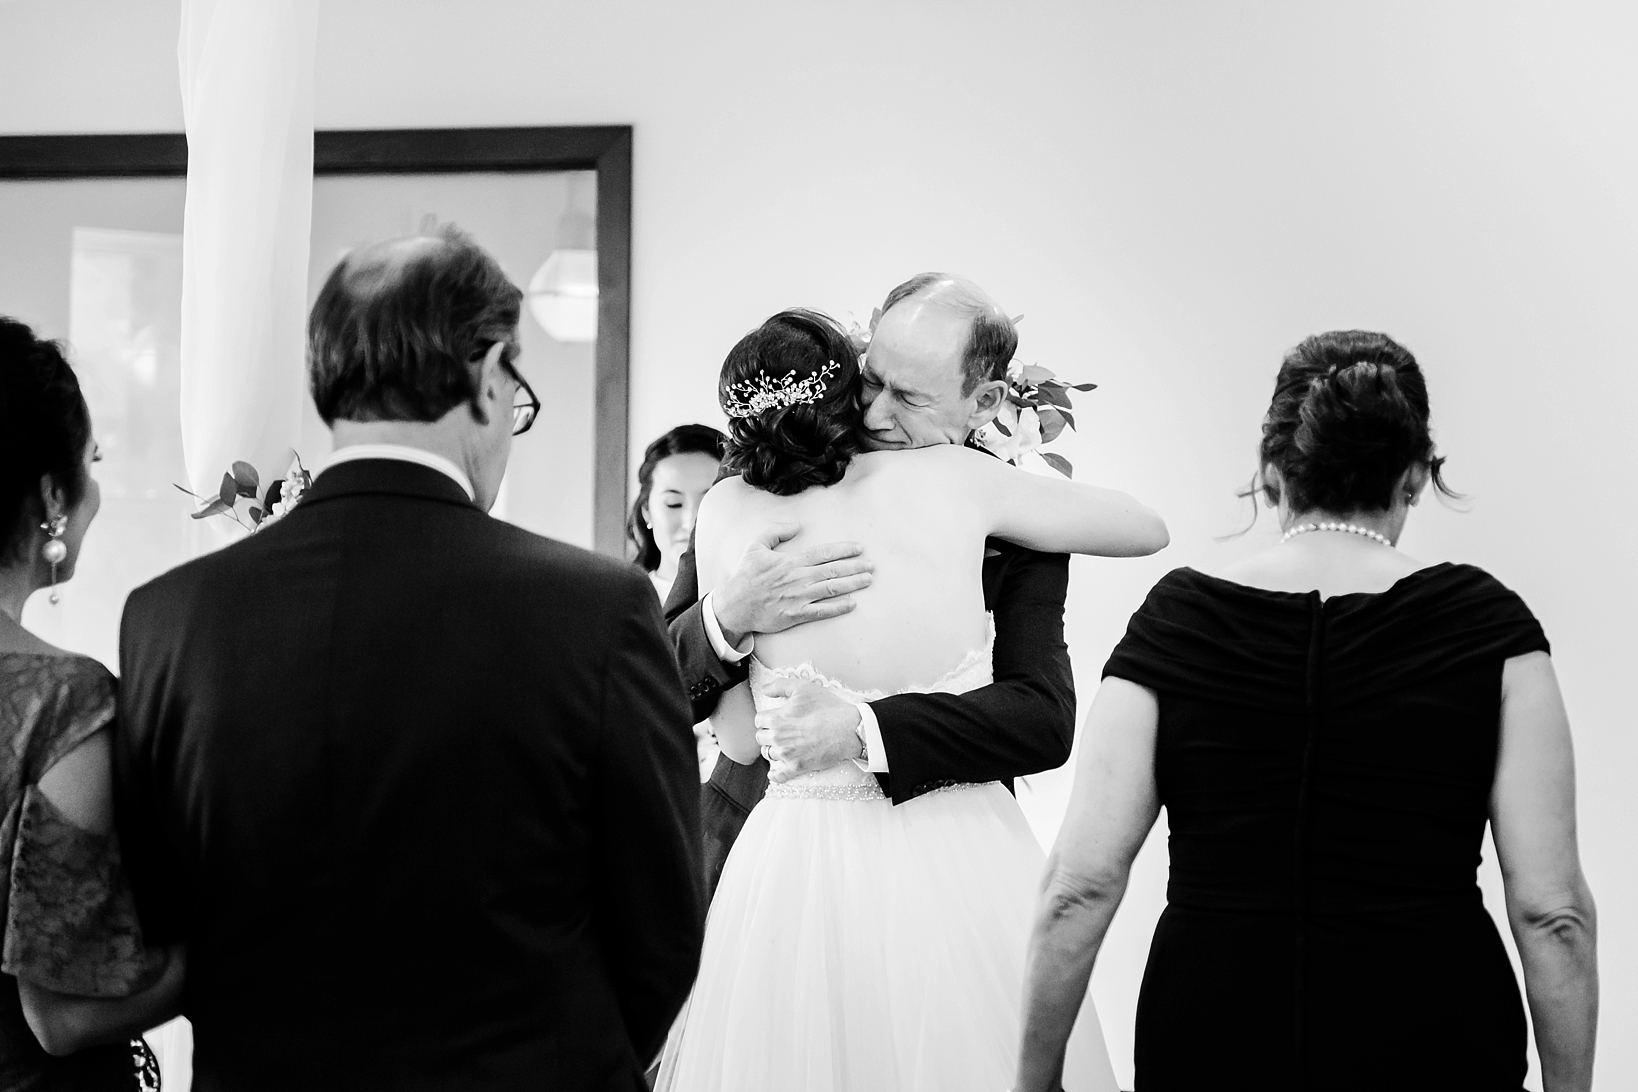 Dad hugs his daughter during the wedding ceremony of her oxford exchange wedding